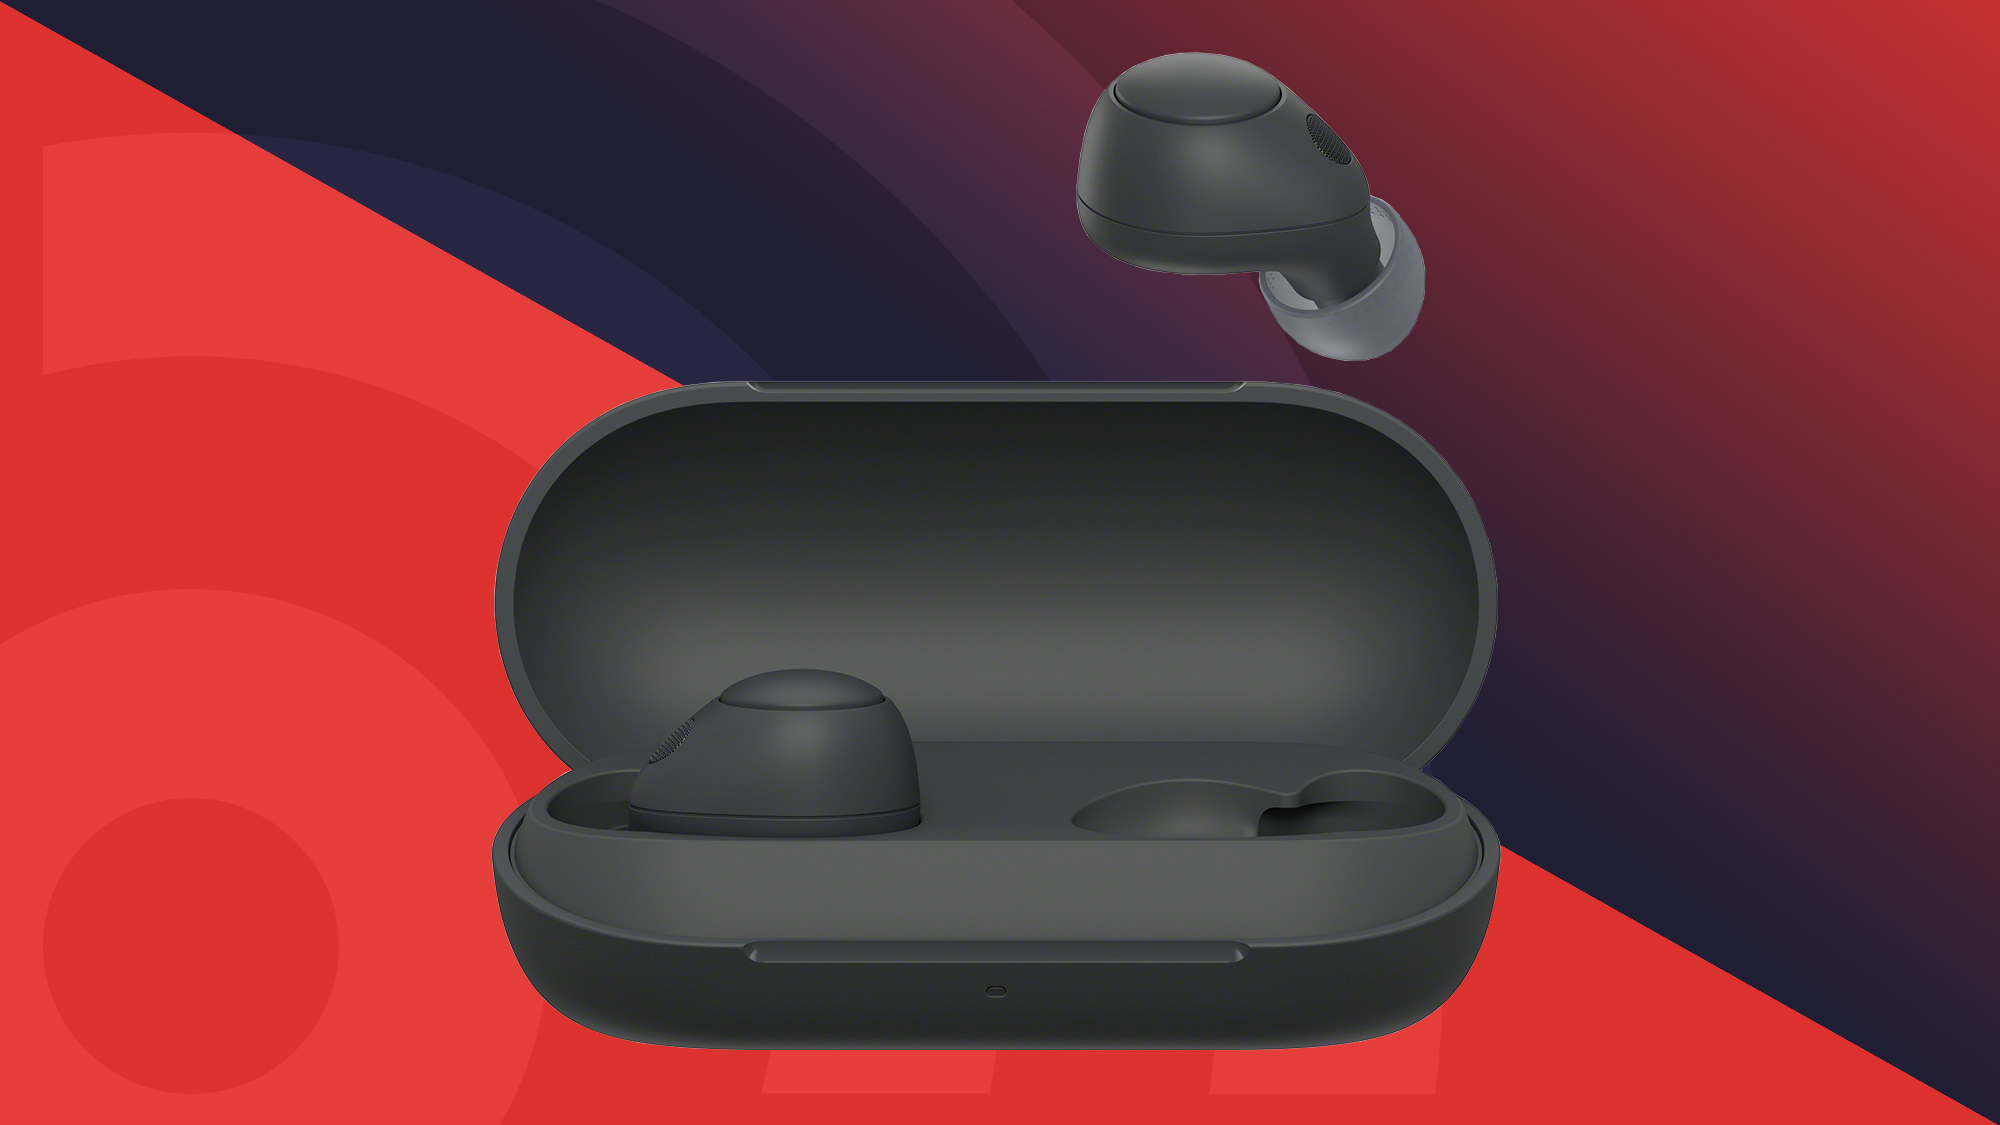 Best Bluetooth Earbuds Roundup: The Best Wireless Battery Life of 2019